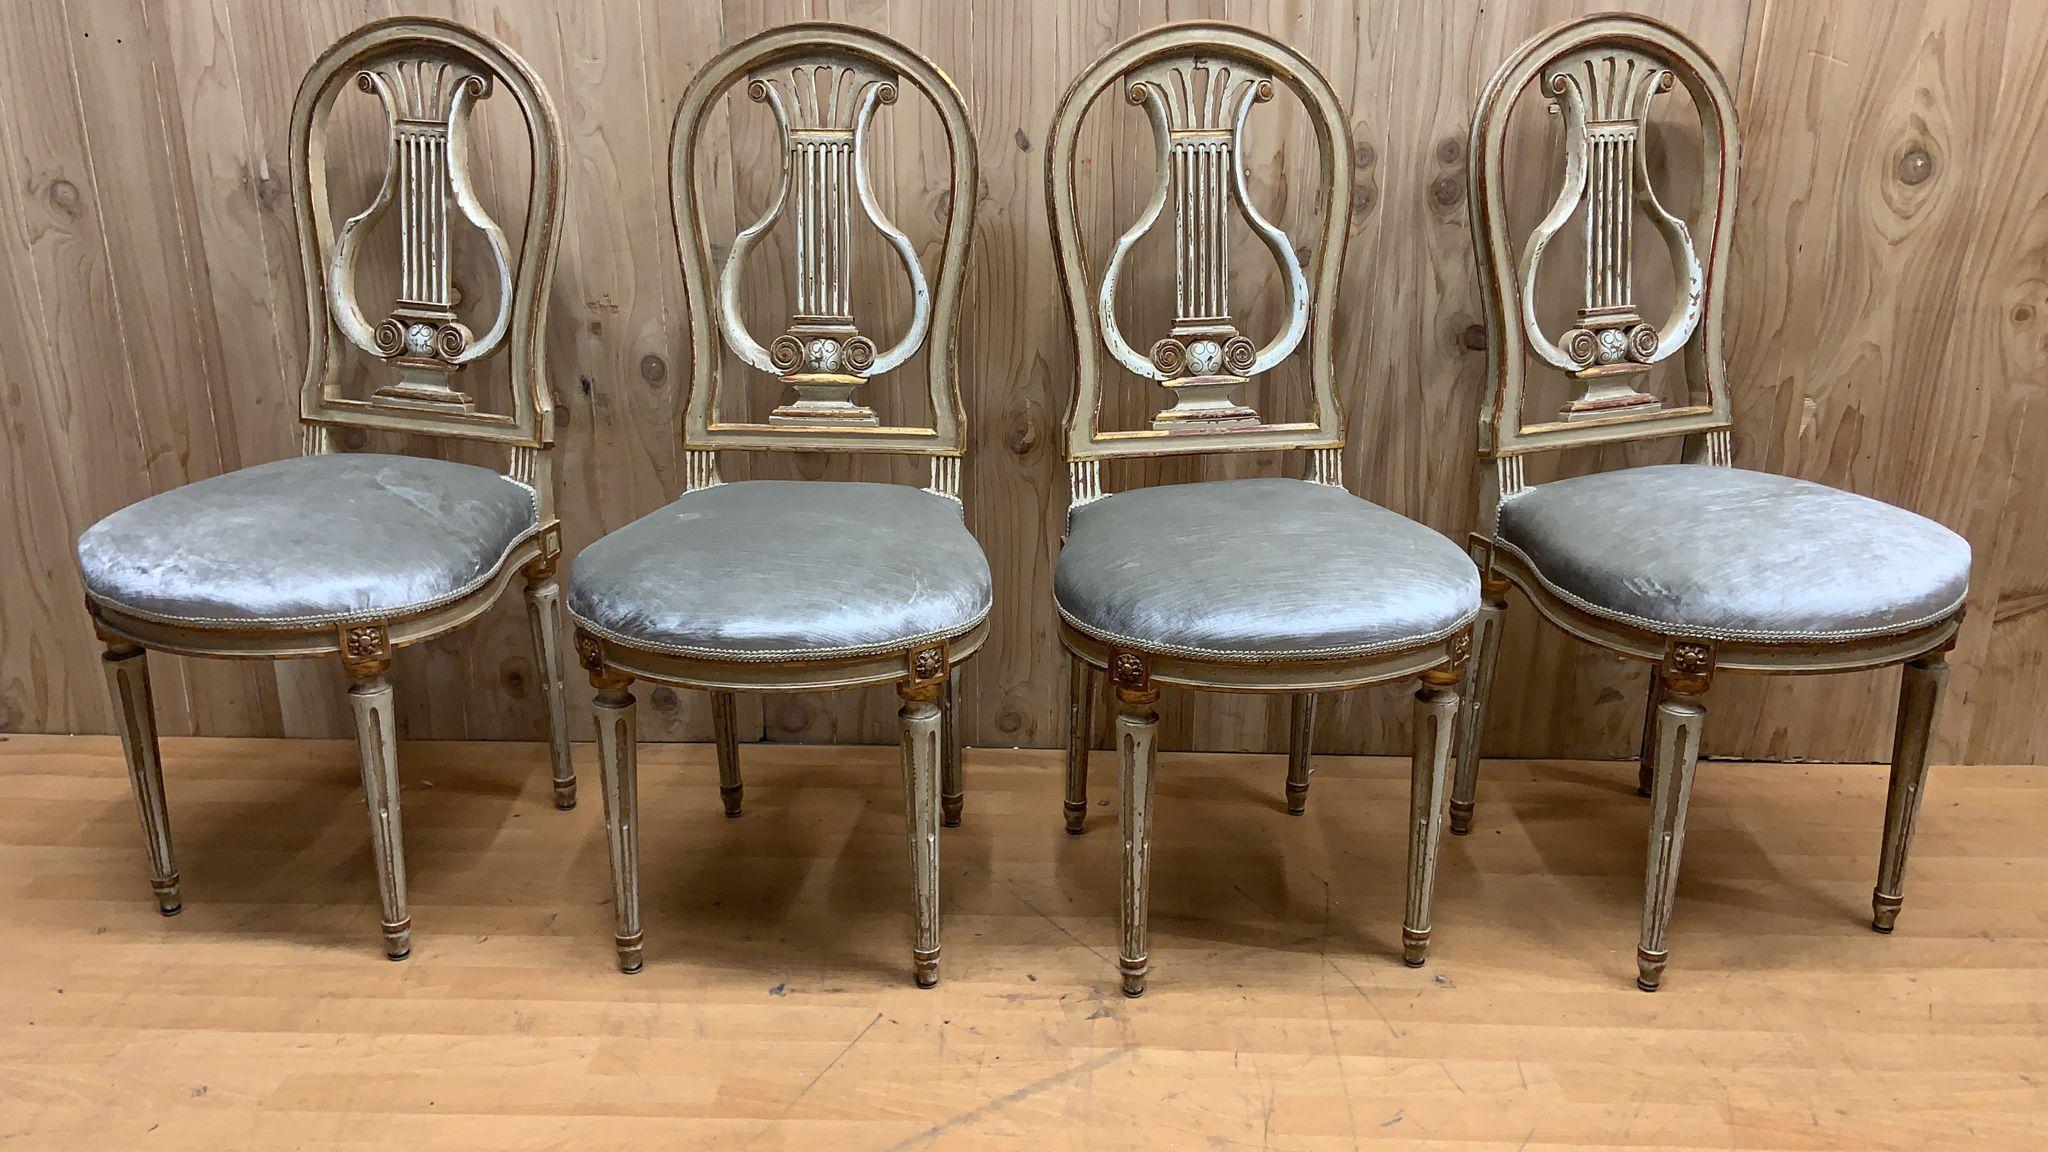 Antique French Louis XVI Style Gilded Balloon-Back Dining Chairs
Newly Upholstered - Set of 4

Gorgeous Set of 4, 19th century Gilded & Hand Carved Balloon Back Fluted Leg, Louis XVI Style Dining Chairs. This Unique Set of 4 Chairs Has Been